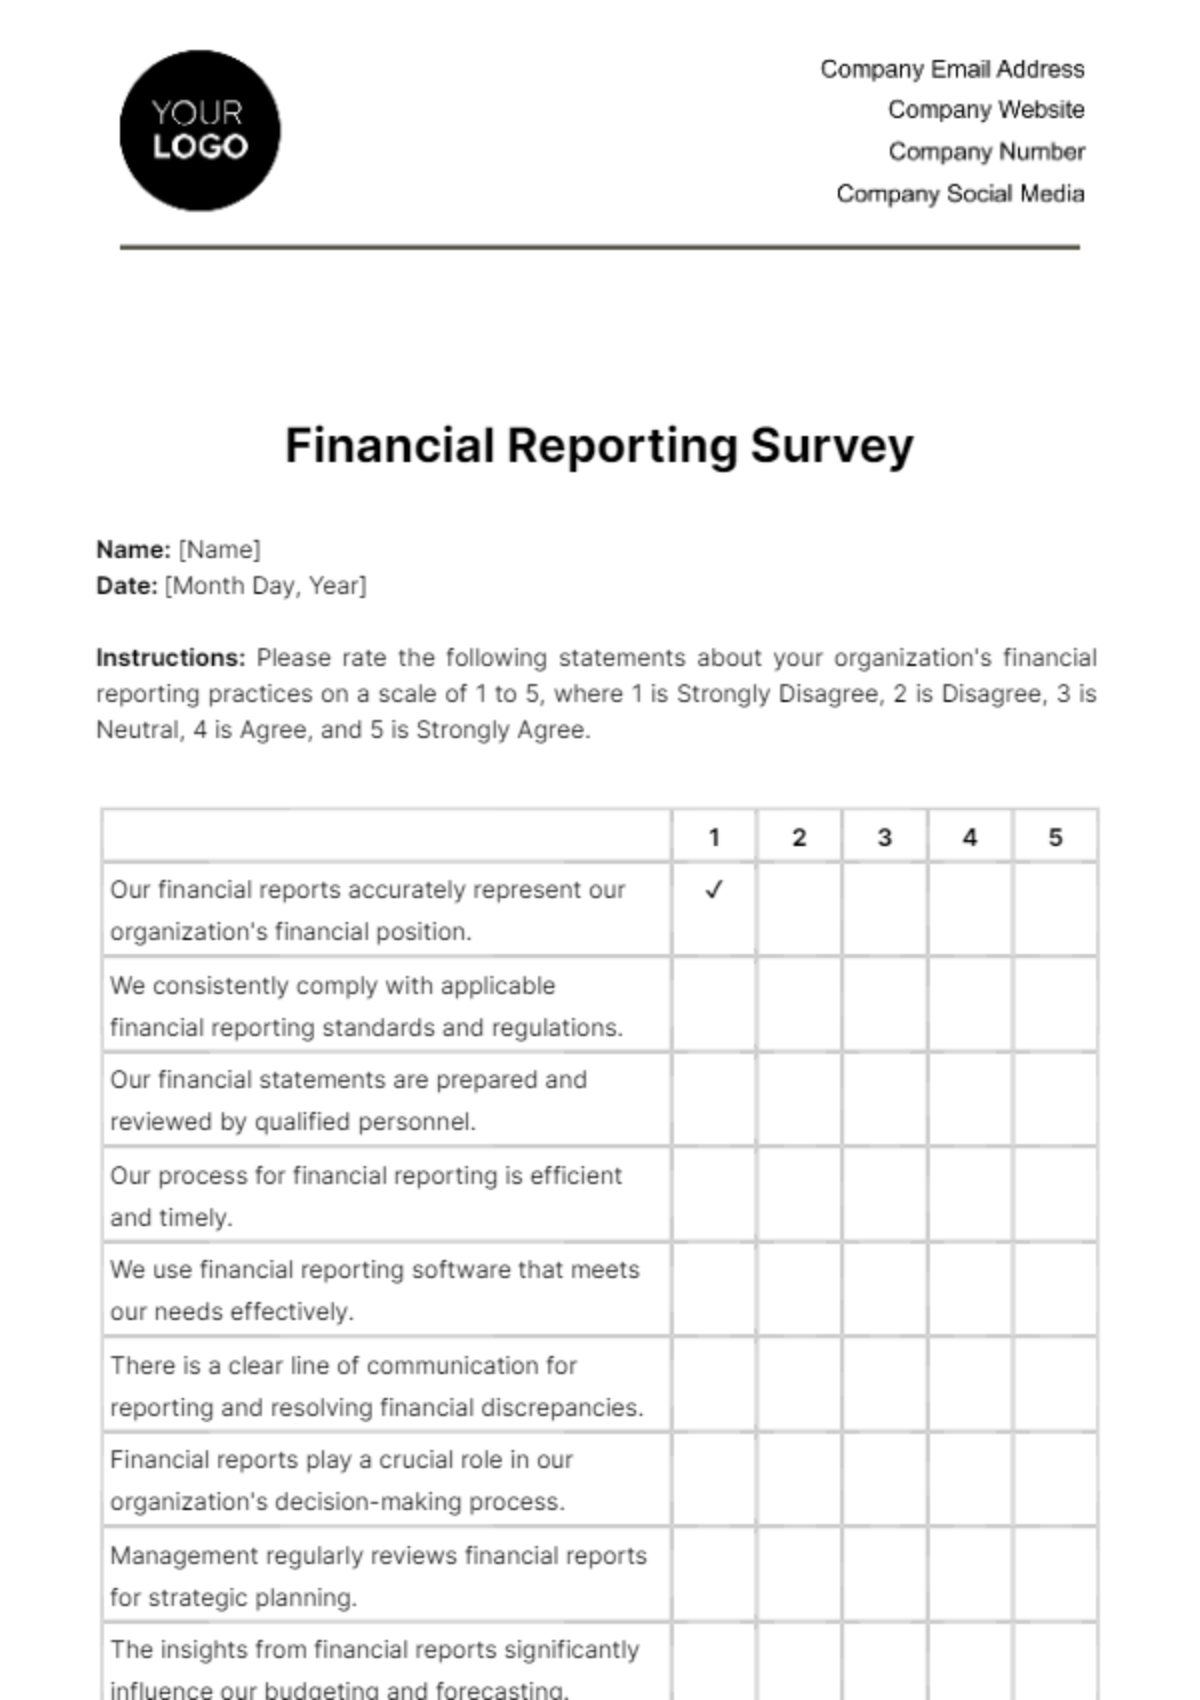 Financial Reporting Survey Template